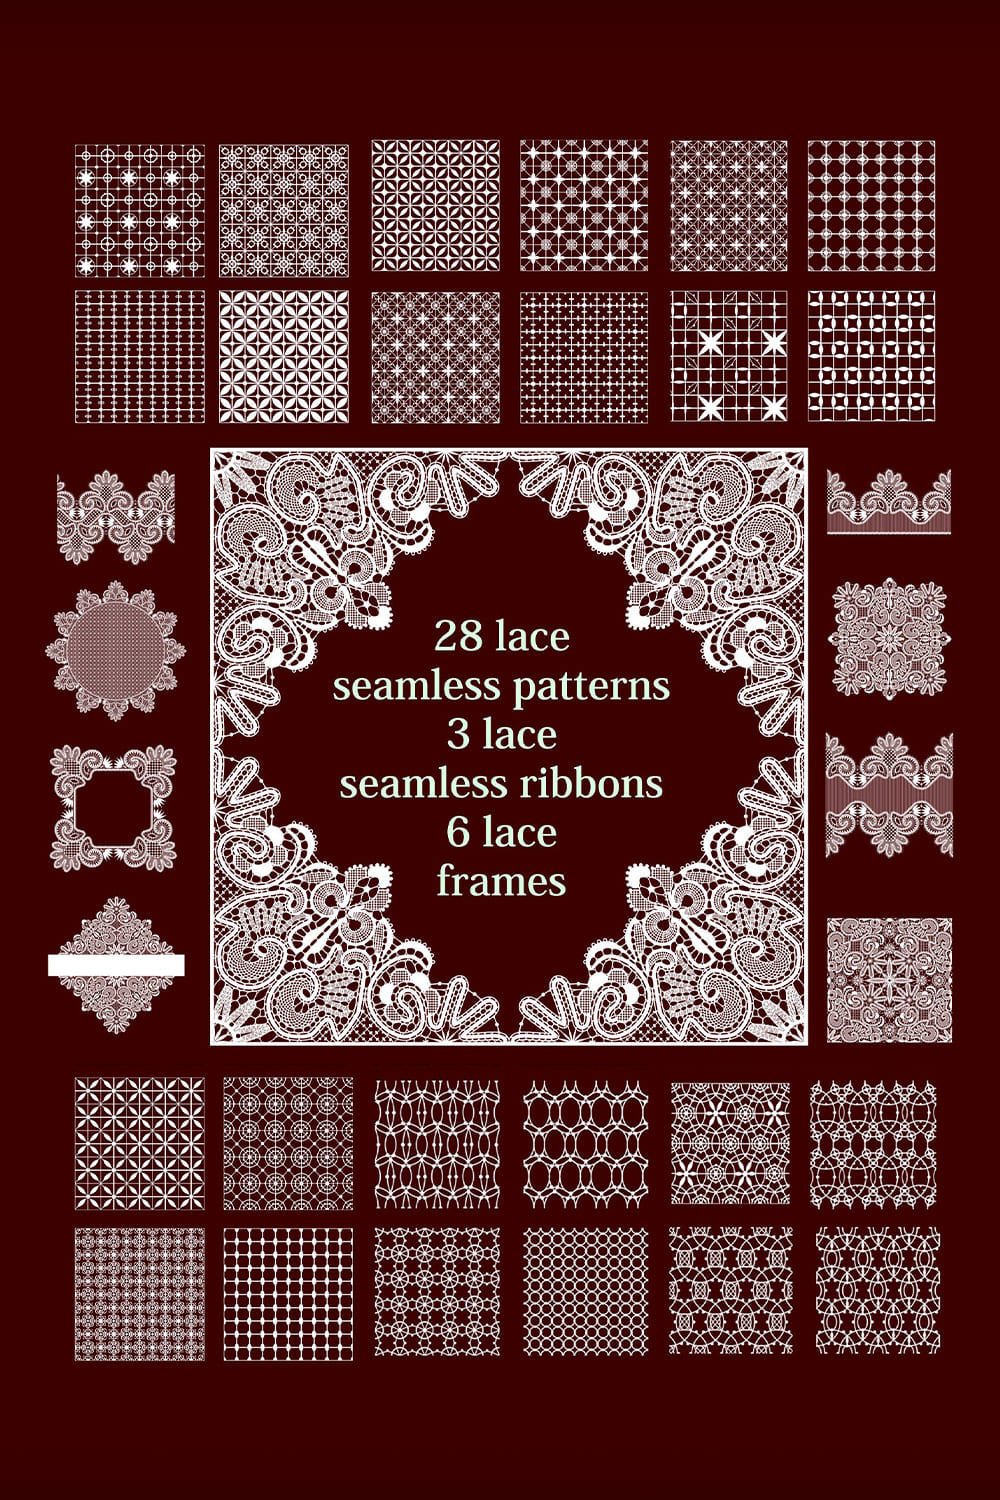 Lace Patterns Collection - Pinterest.